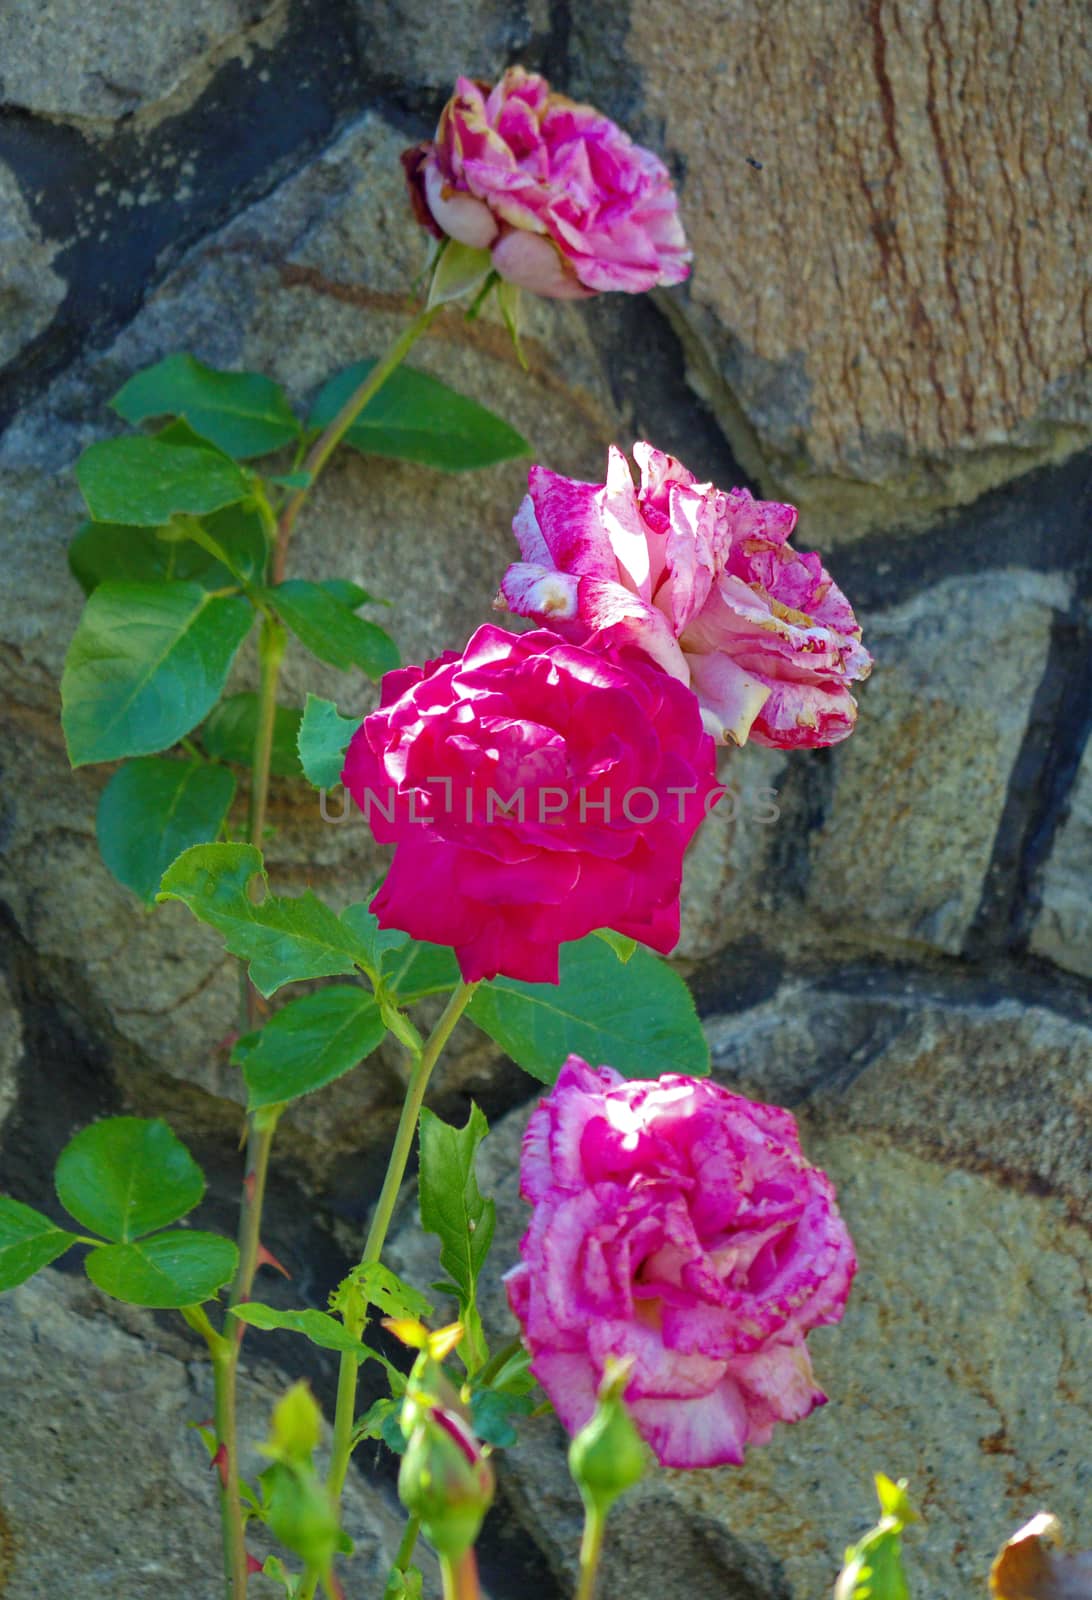 A lovely bush of beautiful pink with white rose petals against the background of large stones located behind them. by Adamchuk